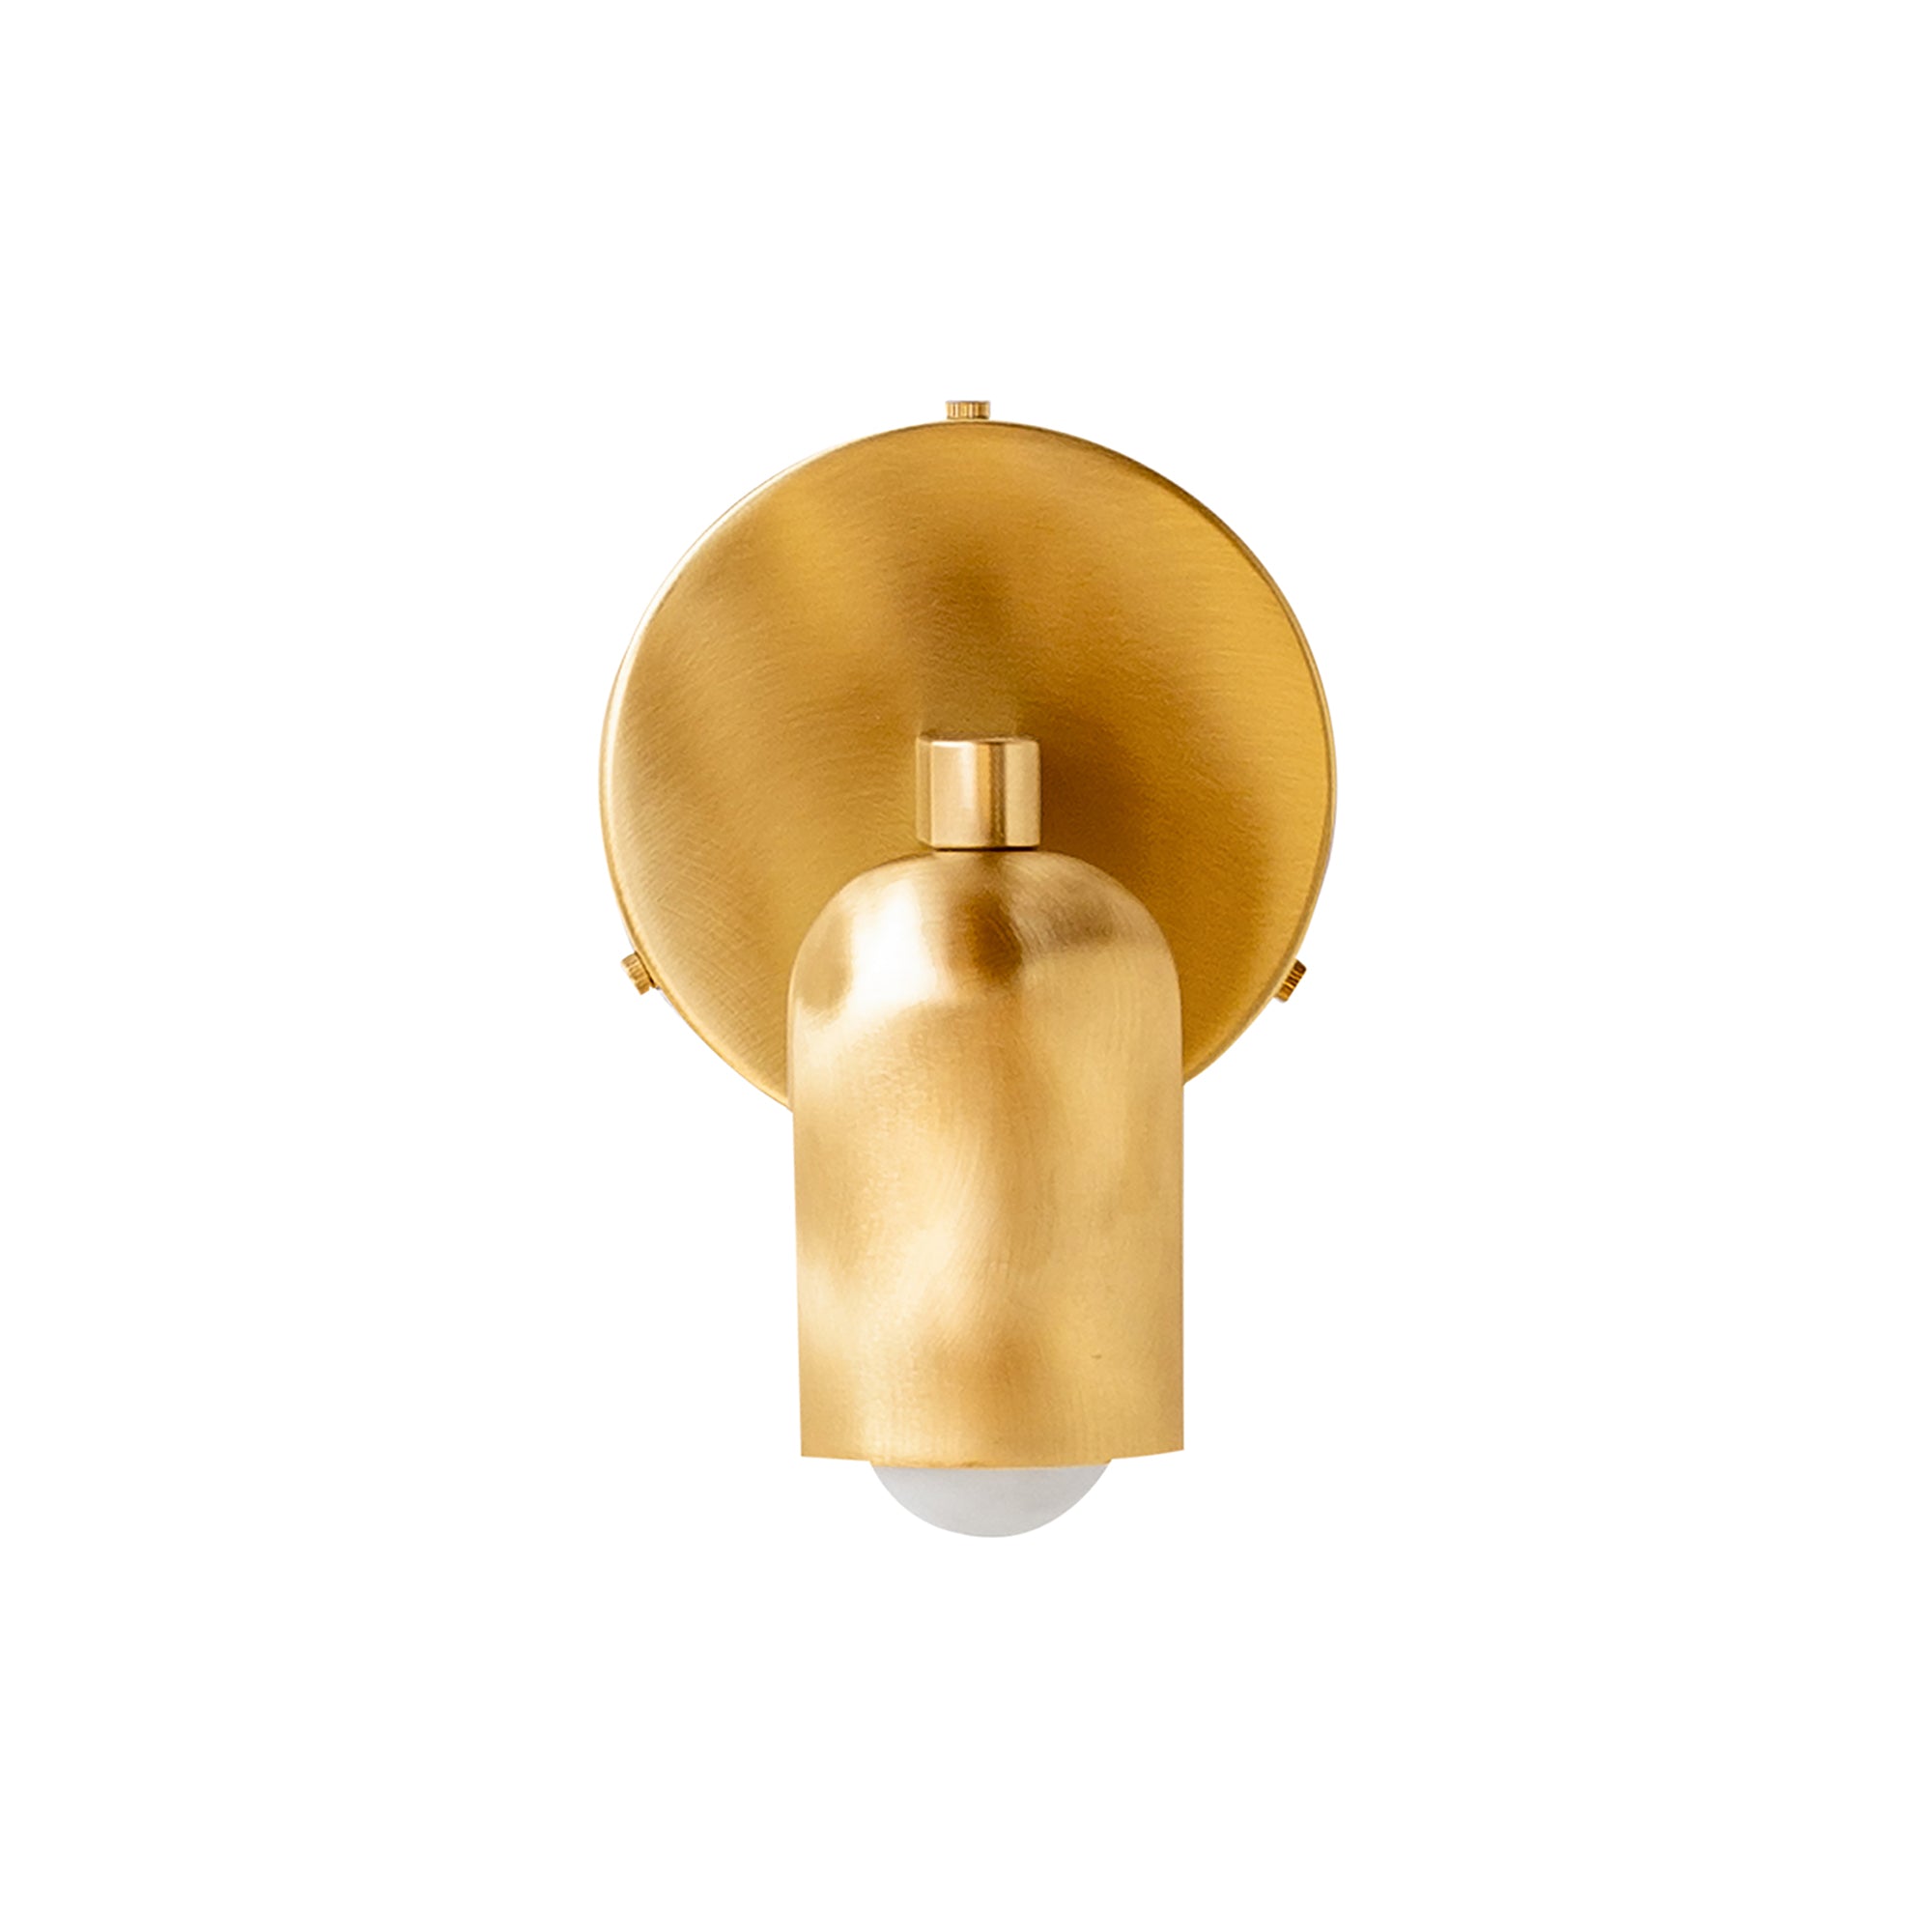 Fixed Down Sconce: Brass + Hardwire